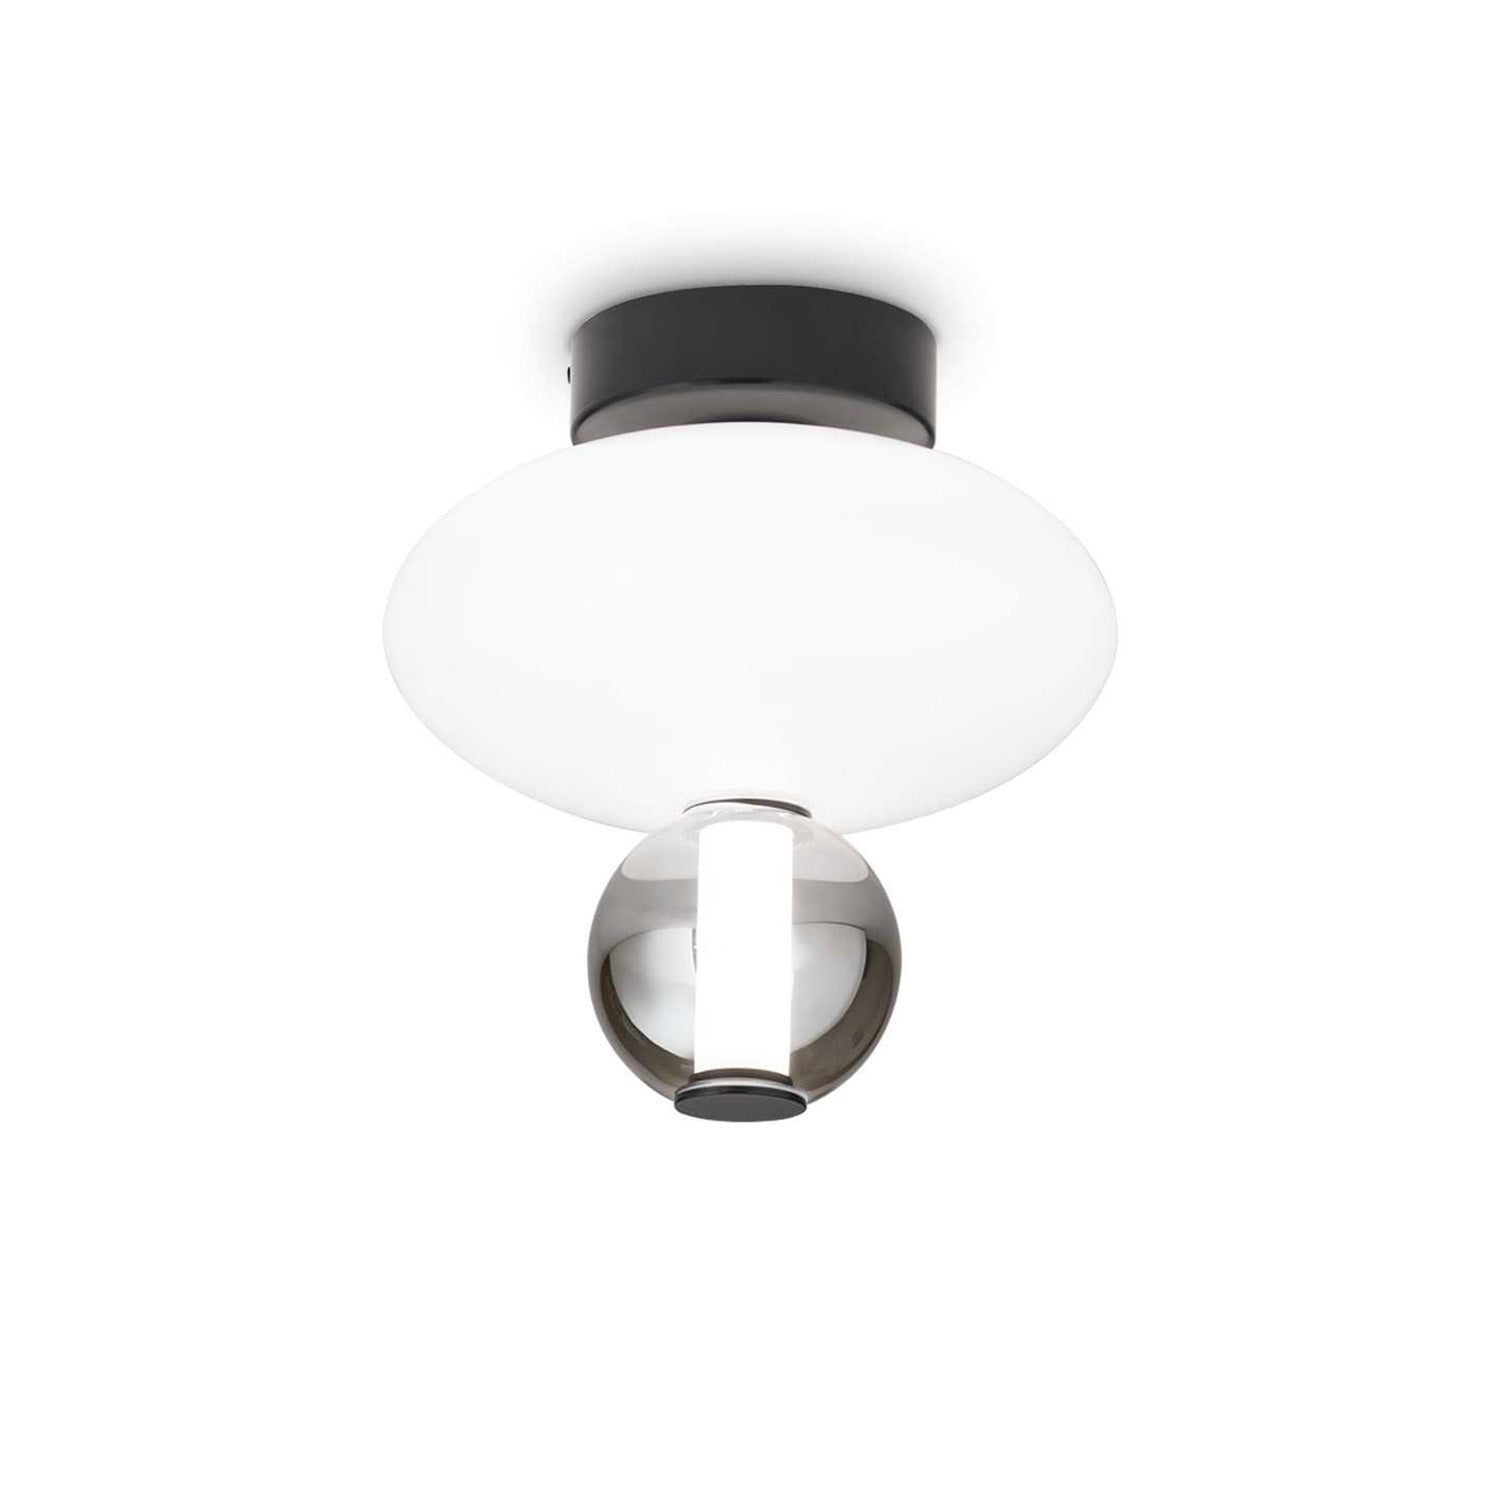 LUMIERE - Designer ceiling light in smoked and white glass